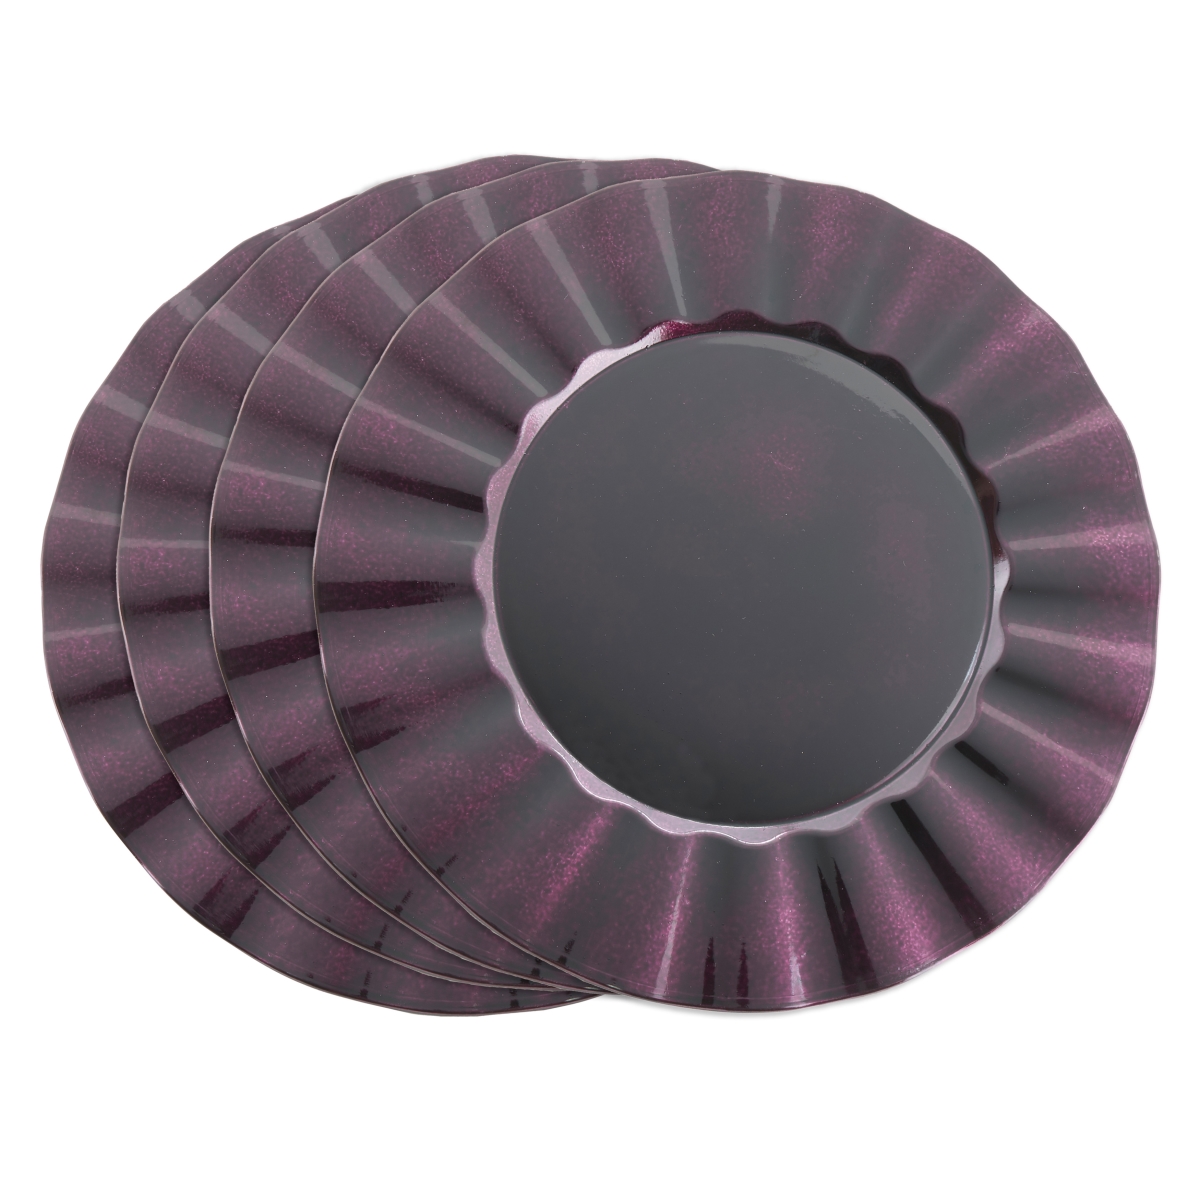 Ch205.eg13r 13 In. Jacquard Round Metallic Ruffle Border Round Charger Plate - Eggplant, Set Of 4